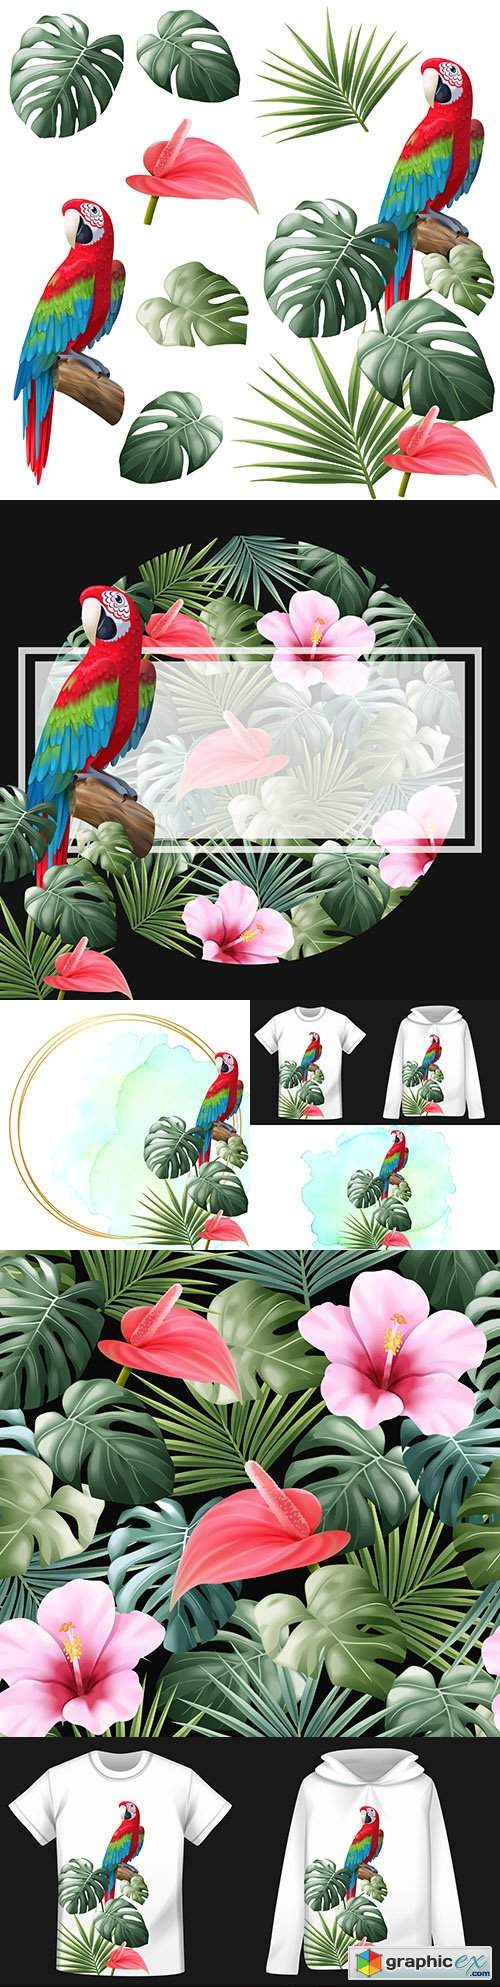  Parrot, leaf monsters and palm trees with colors realistic illustrations 